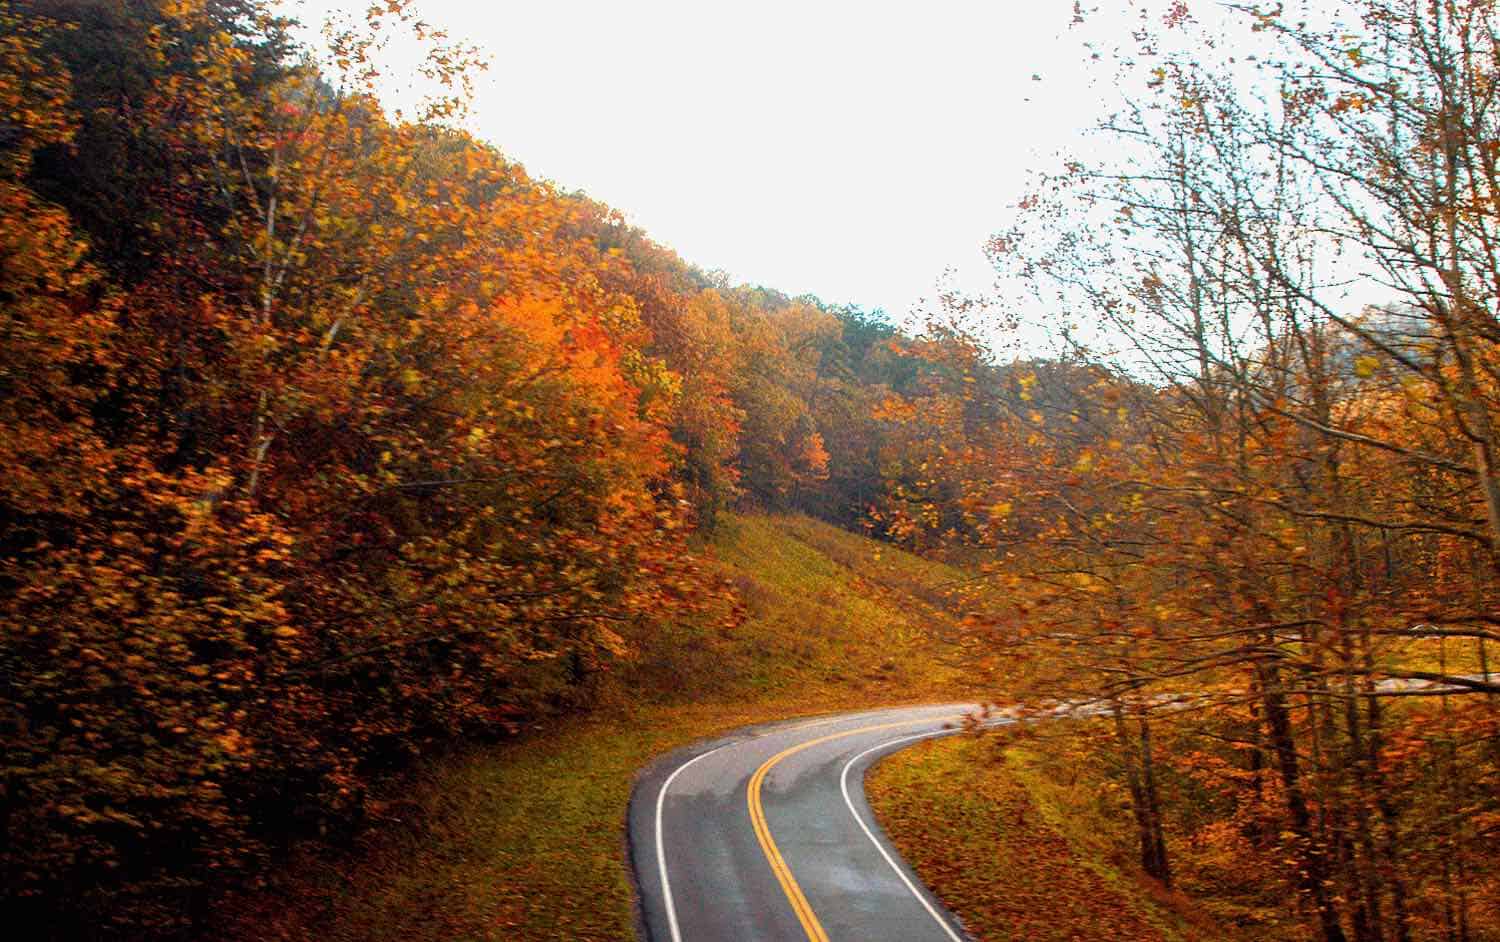 Two-lane road curves through red and gold fall foliage